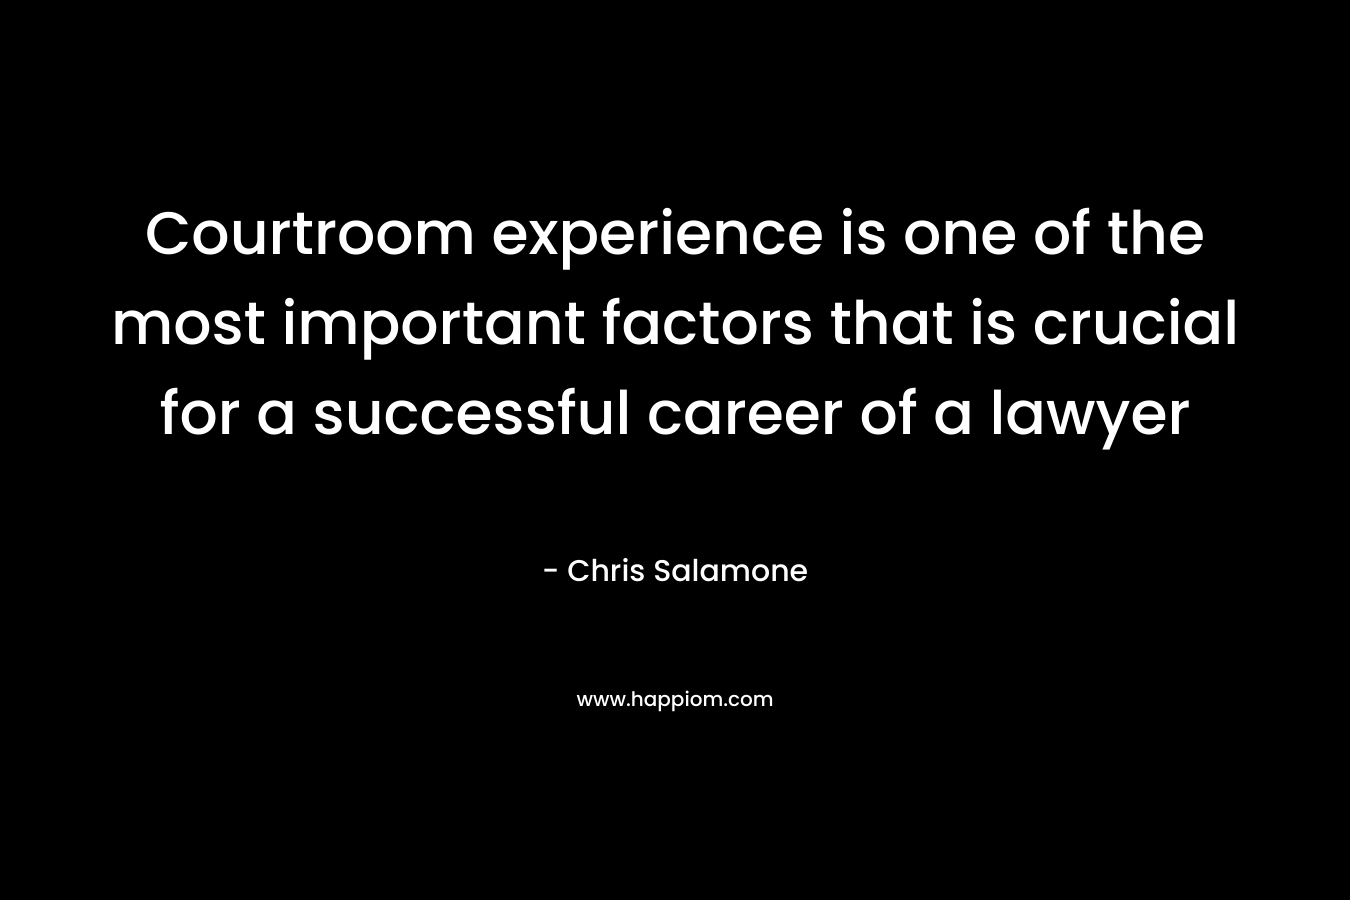 Courtroom experience is one of the most important factors that is crucial for a successful career of a lawyer